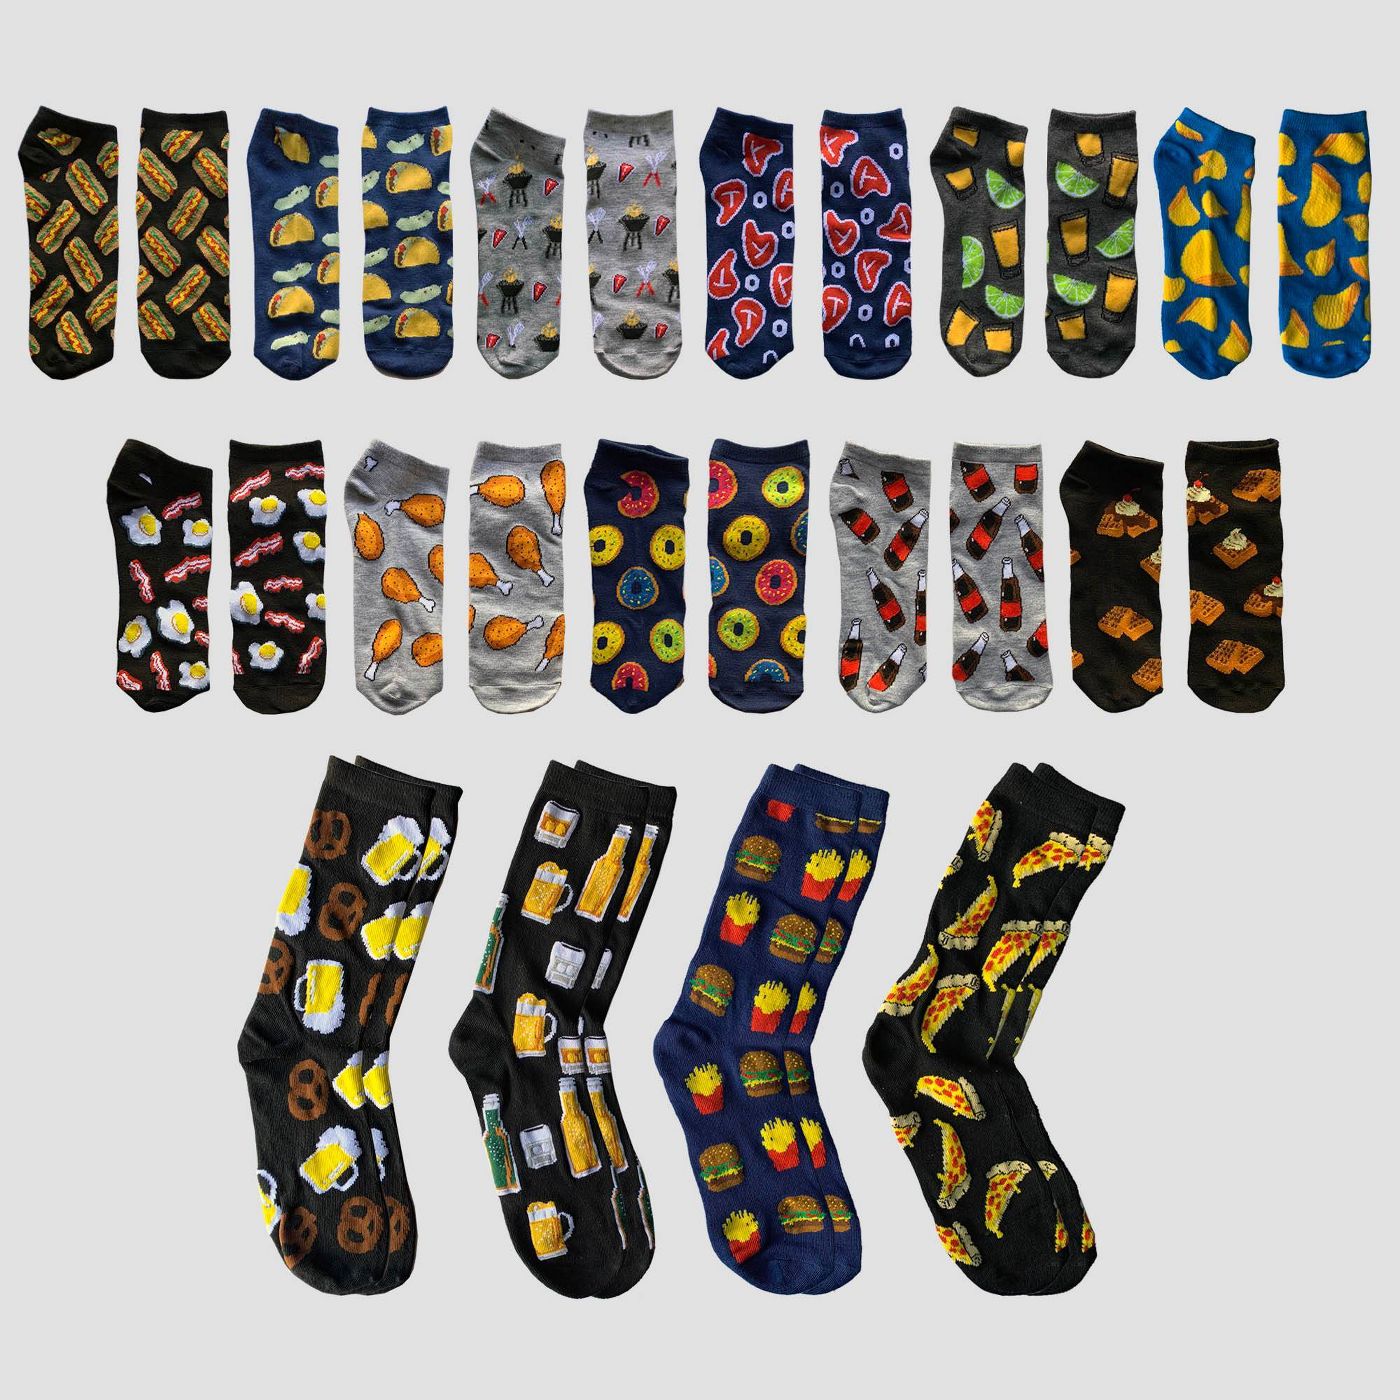 Target Sock Advent Calendars For Men - Available Now! | MSA